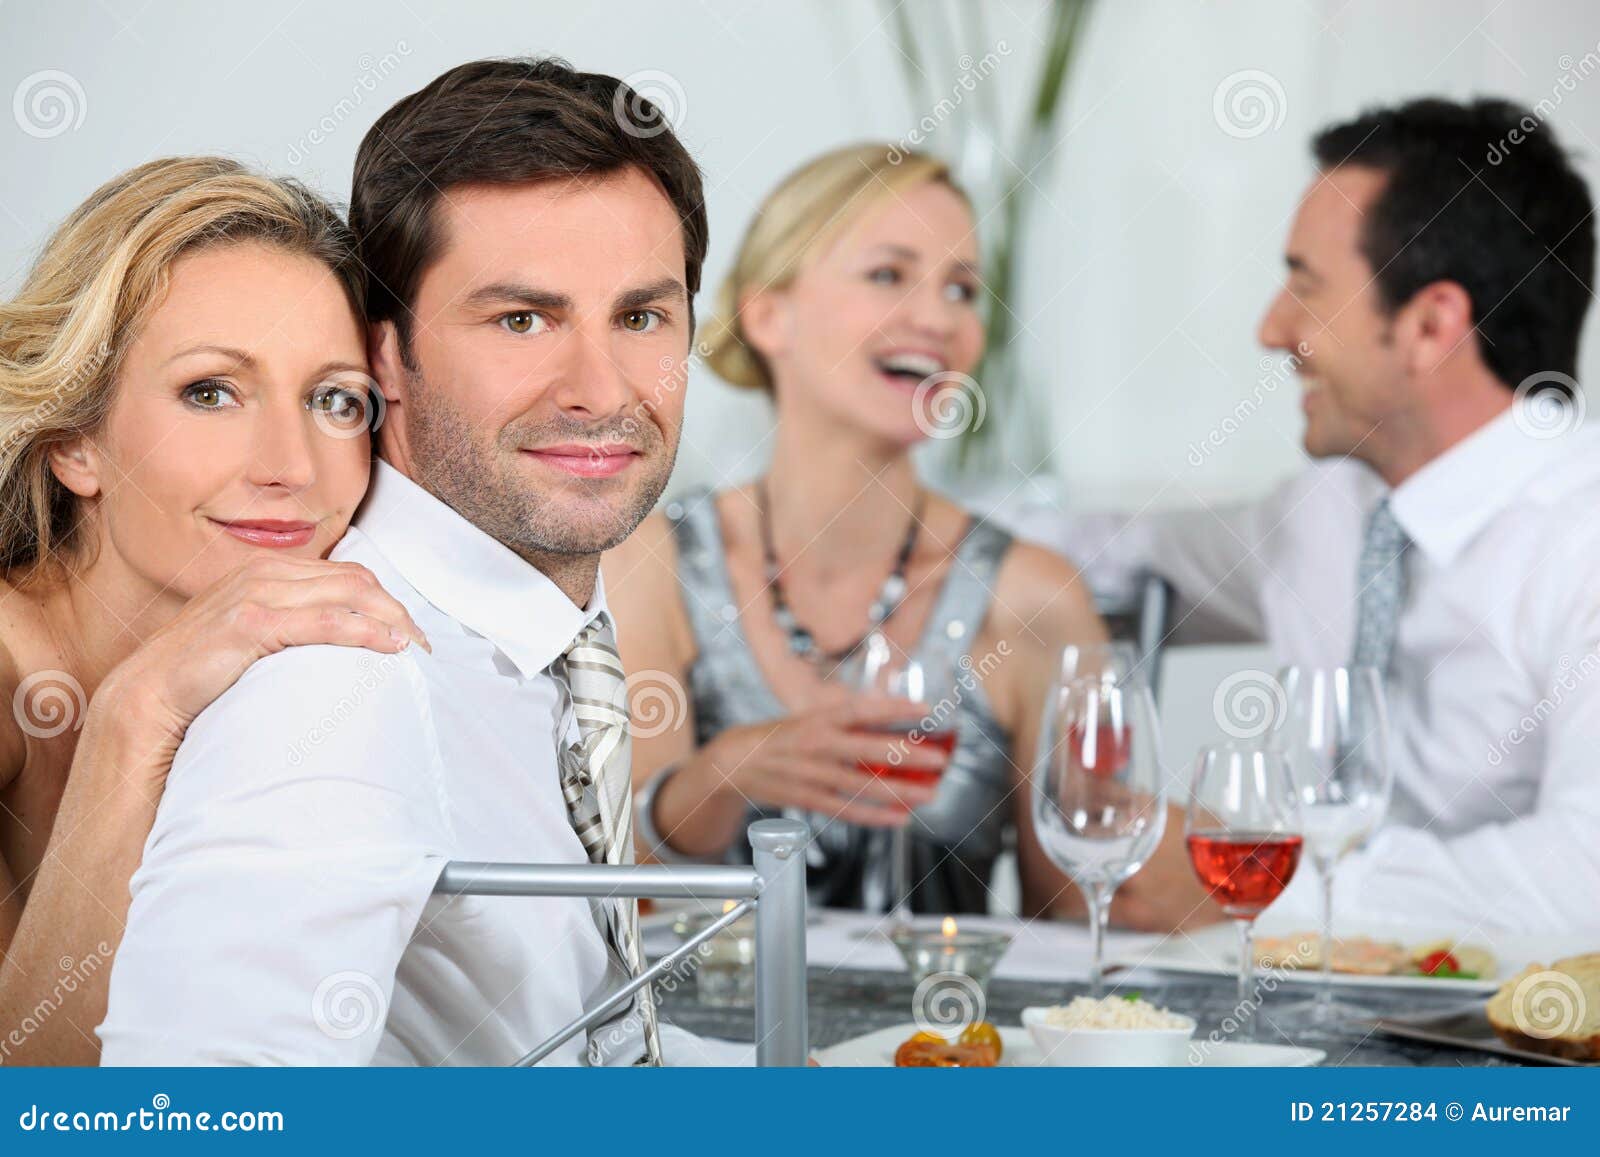 Couples At A Dinner Party Stock Images - Image: 21257284